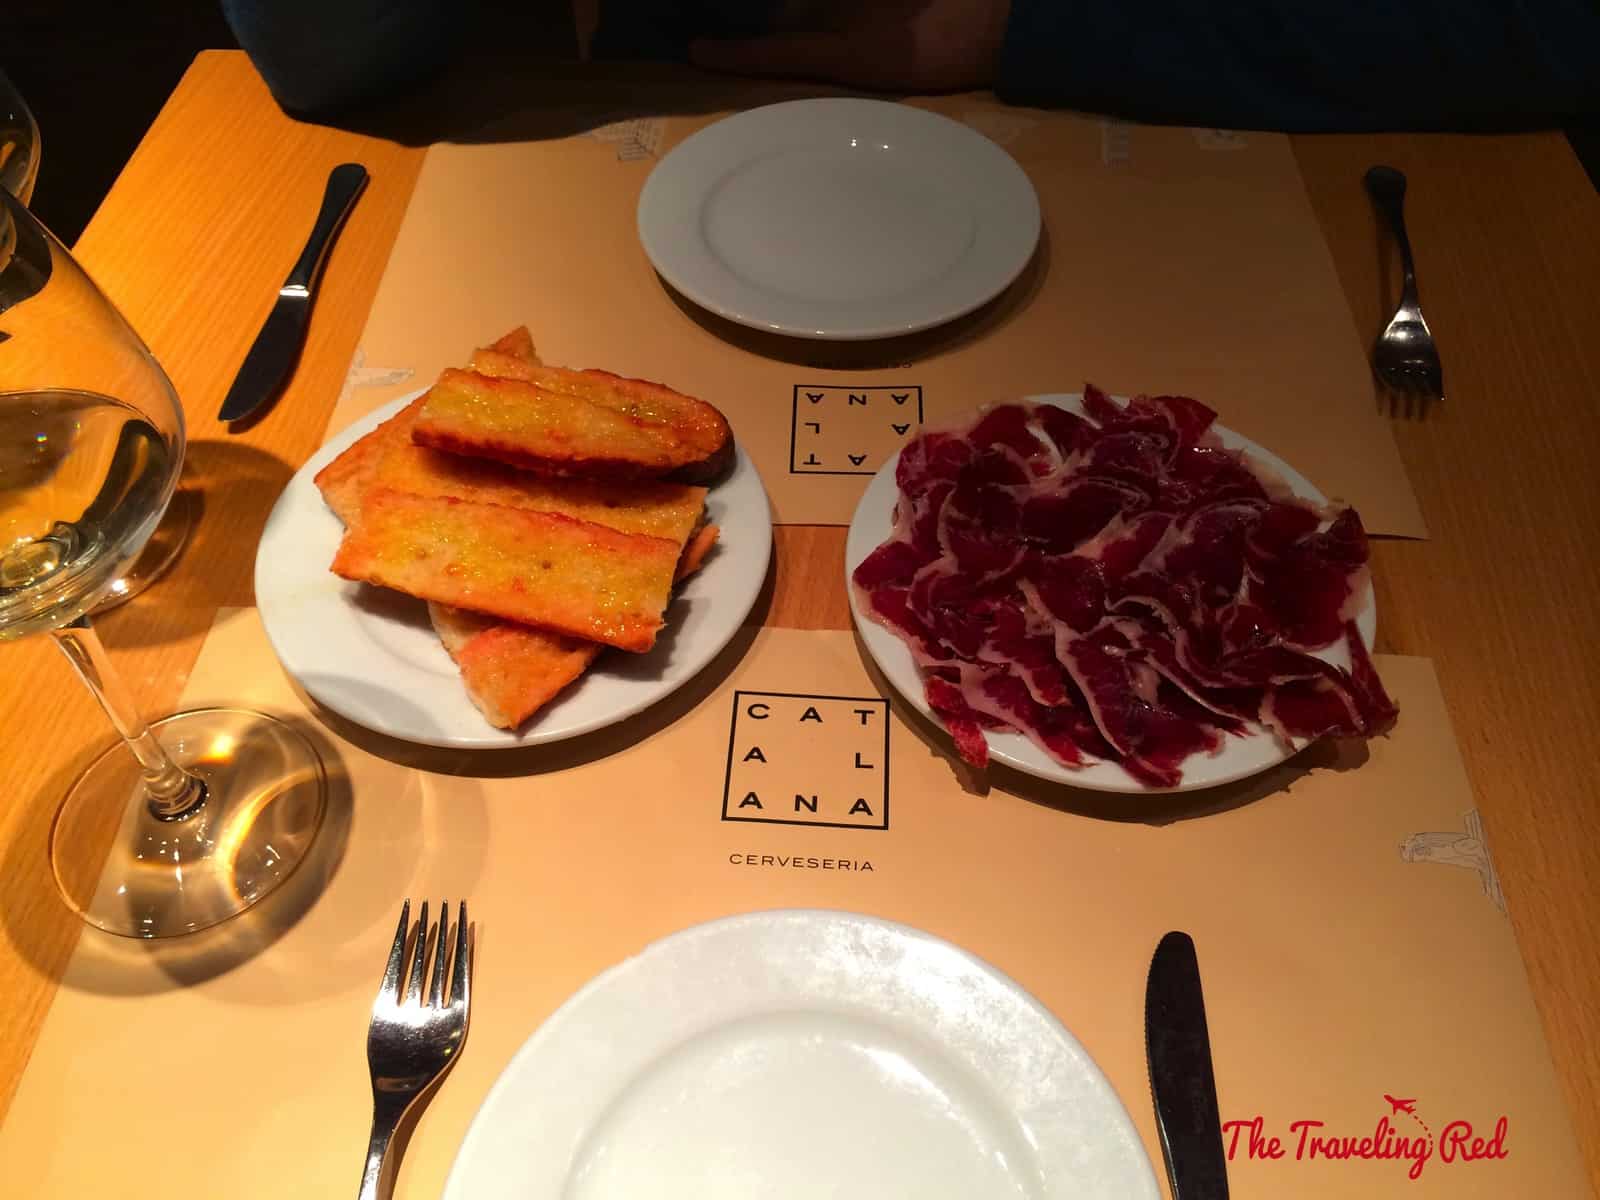 My go to tapas restaurant in Barcelona, Spain is always Cerveceria Catalana! It’s an inexpensive tapa place that is always packed and now I know why. I always recommend it and everyone loves it. You don't want to miss it!